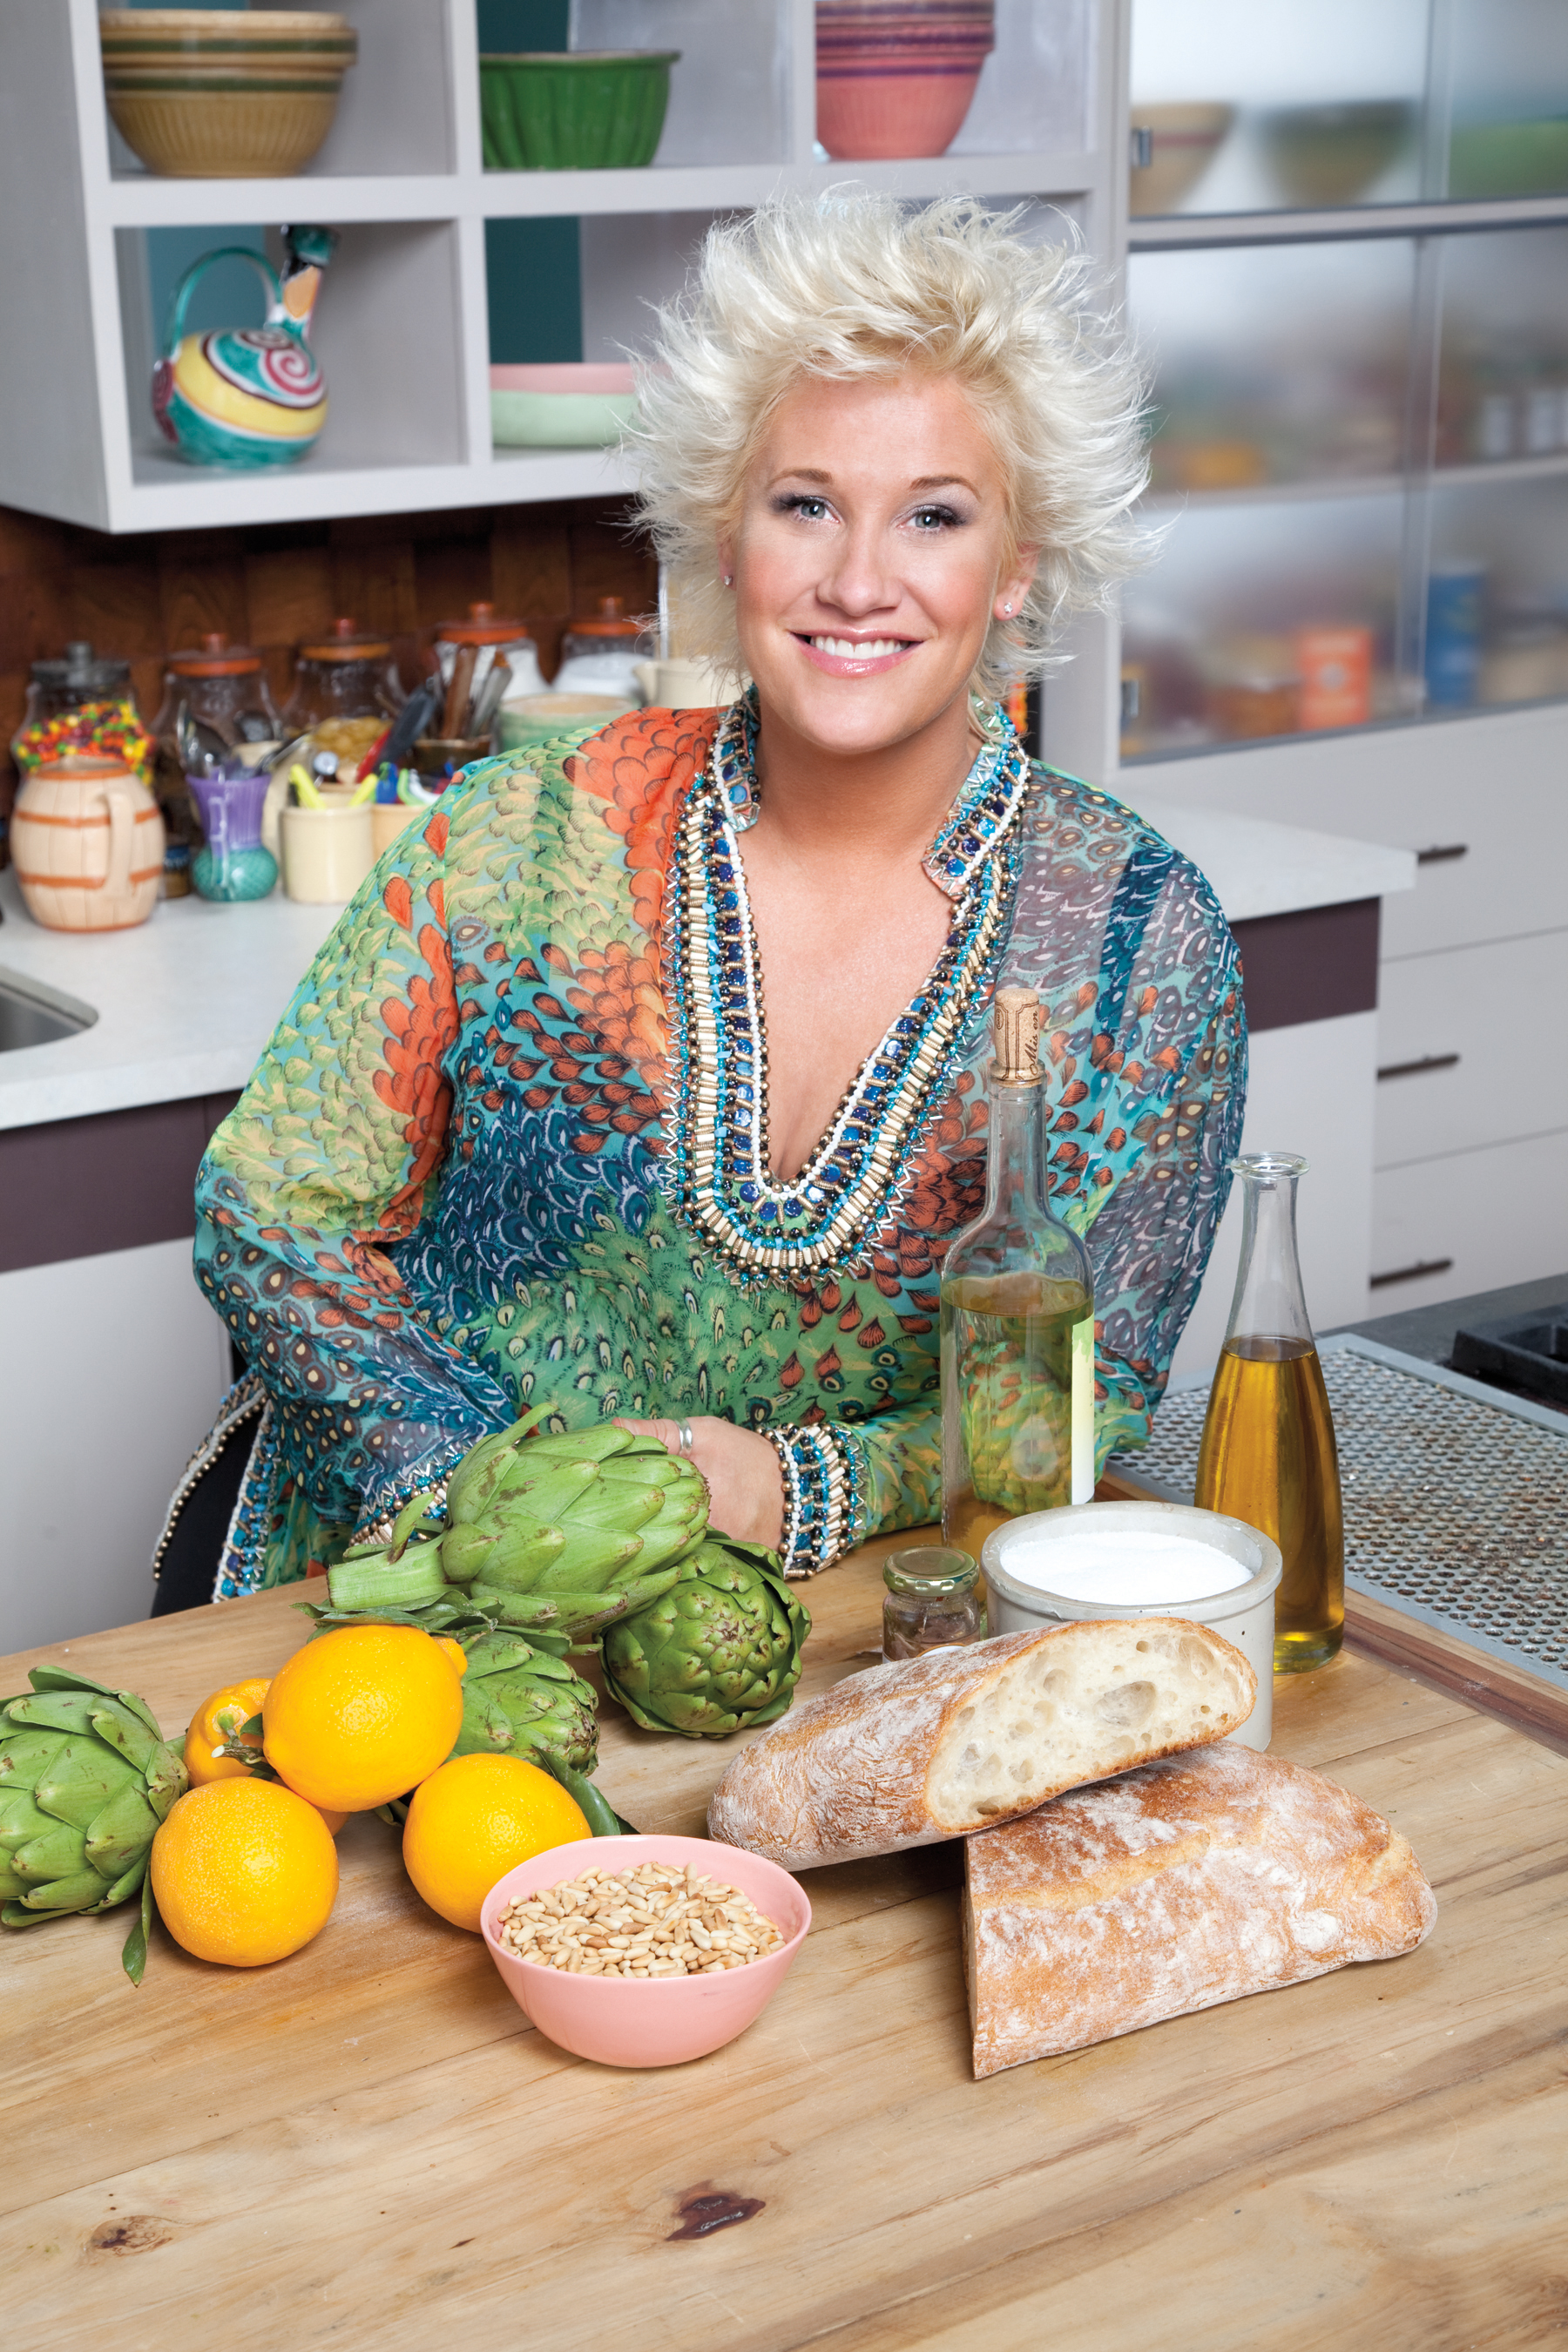 Anne Burrell, Co-host, Food Network’s “Worst Cooks in America”